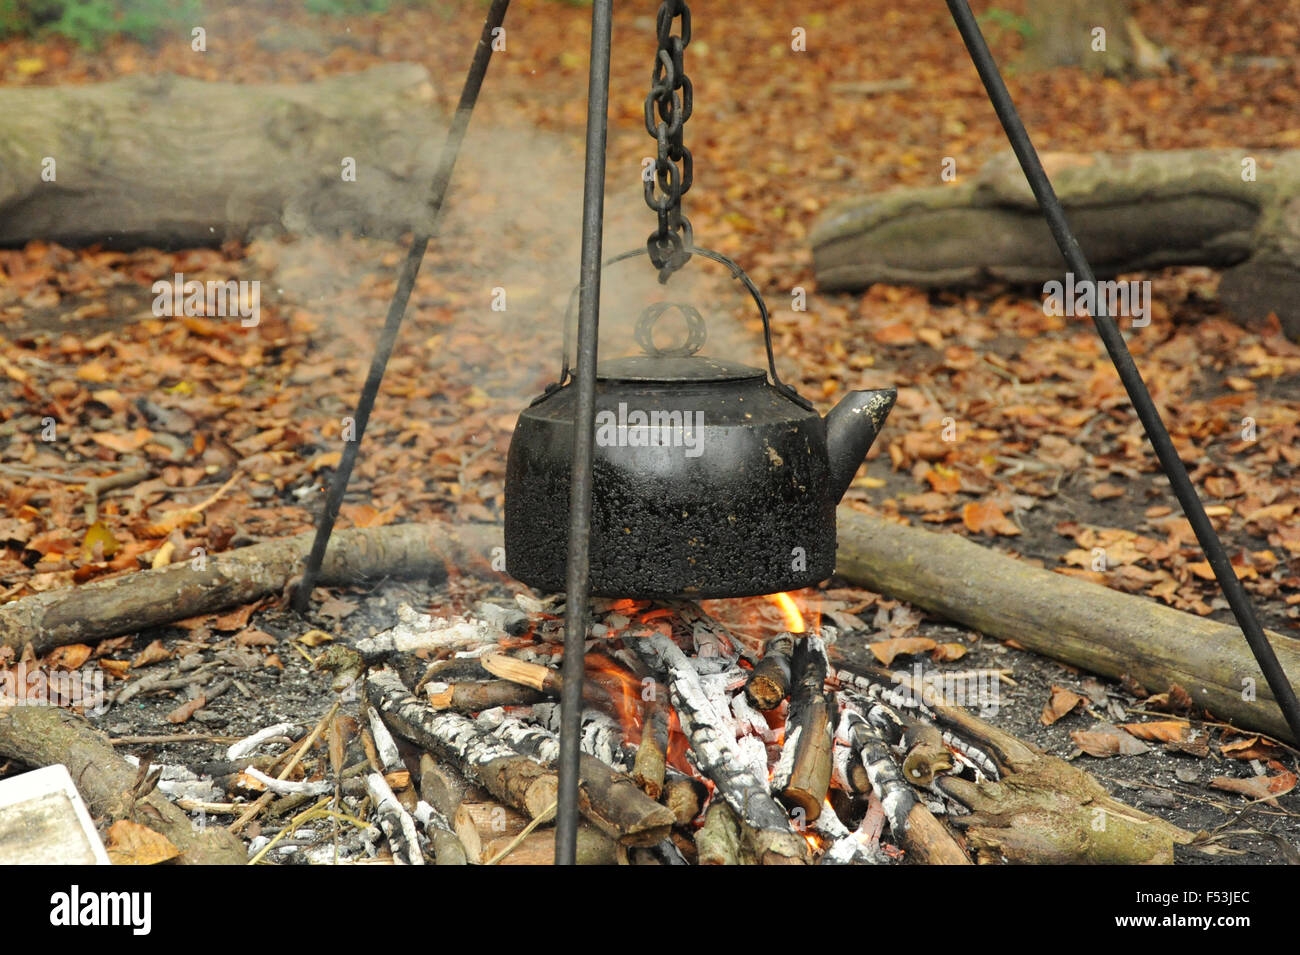 Kettle Boiling over open fire In The woods Stock Photo